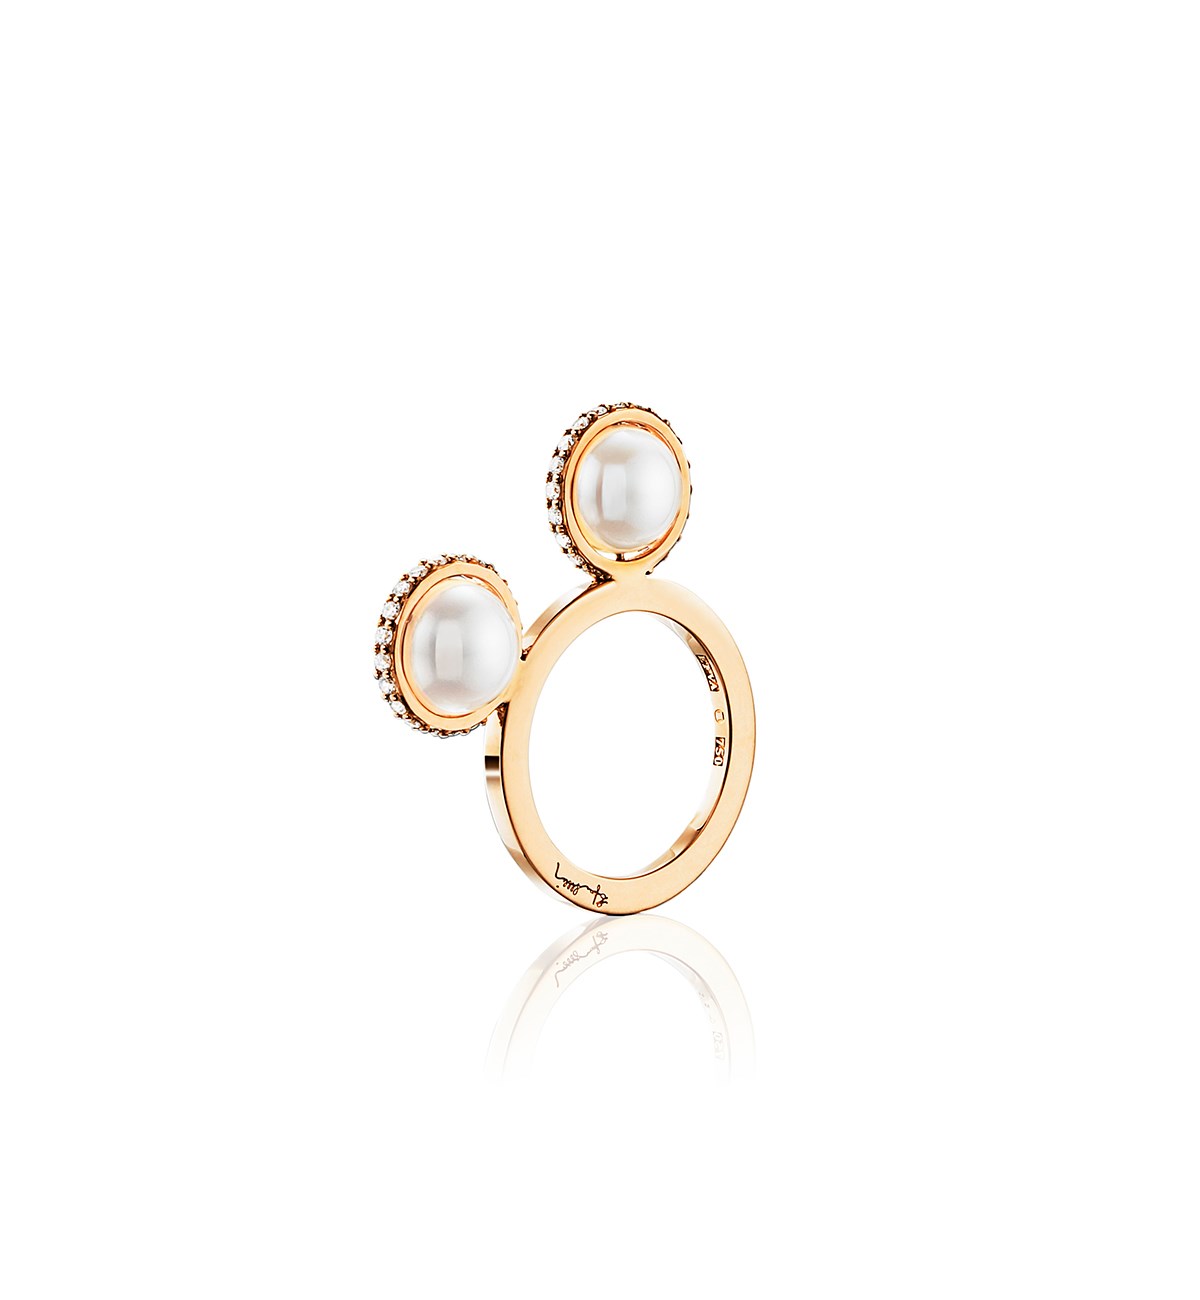  Double Day Pearl &amp; Stars ring in 18k gold, $2,710,  available at Efva Attling .&nbsp;&nbsp; 